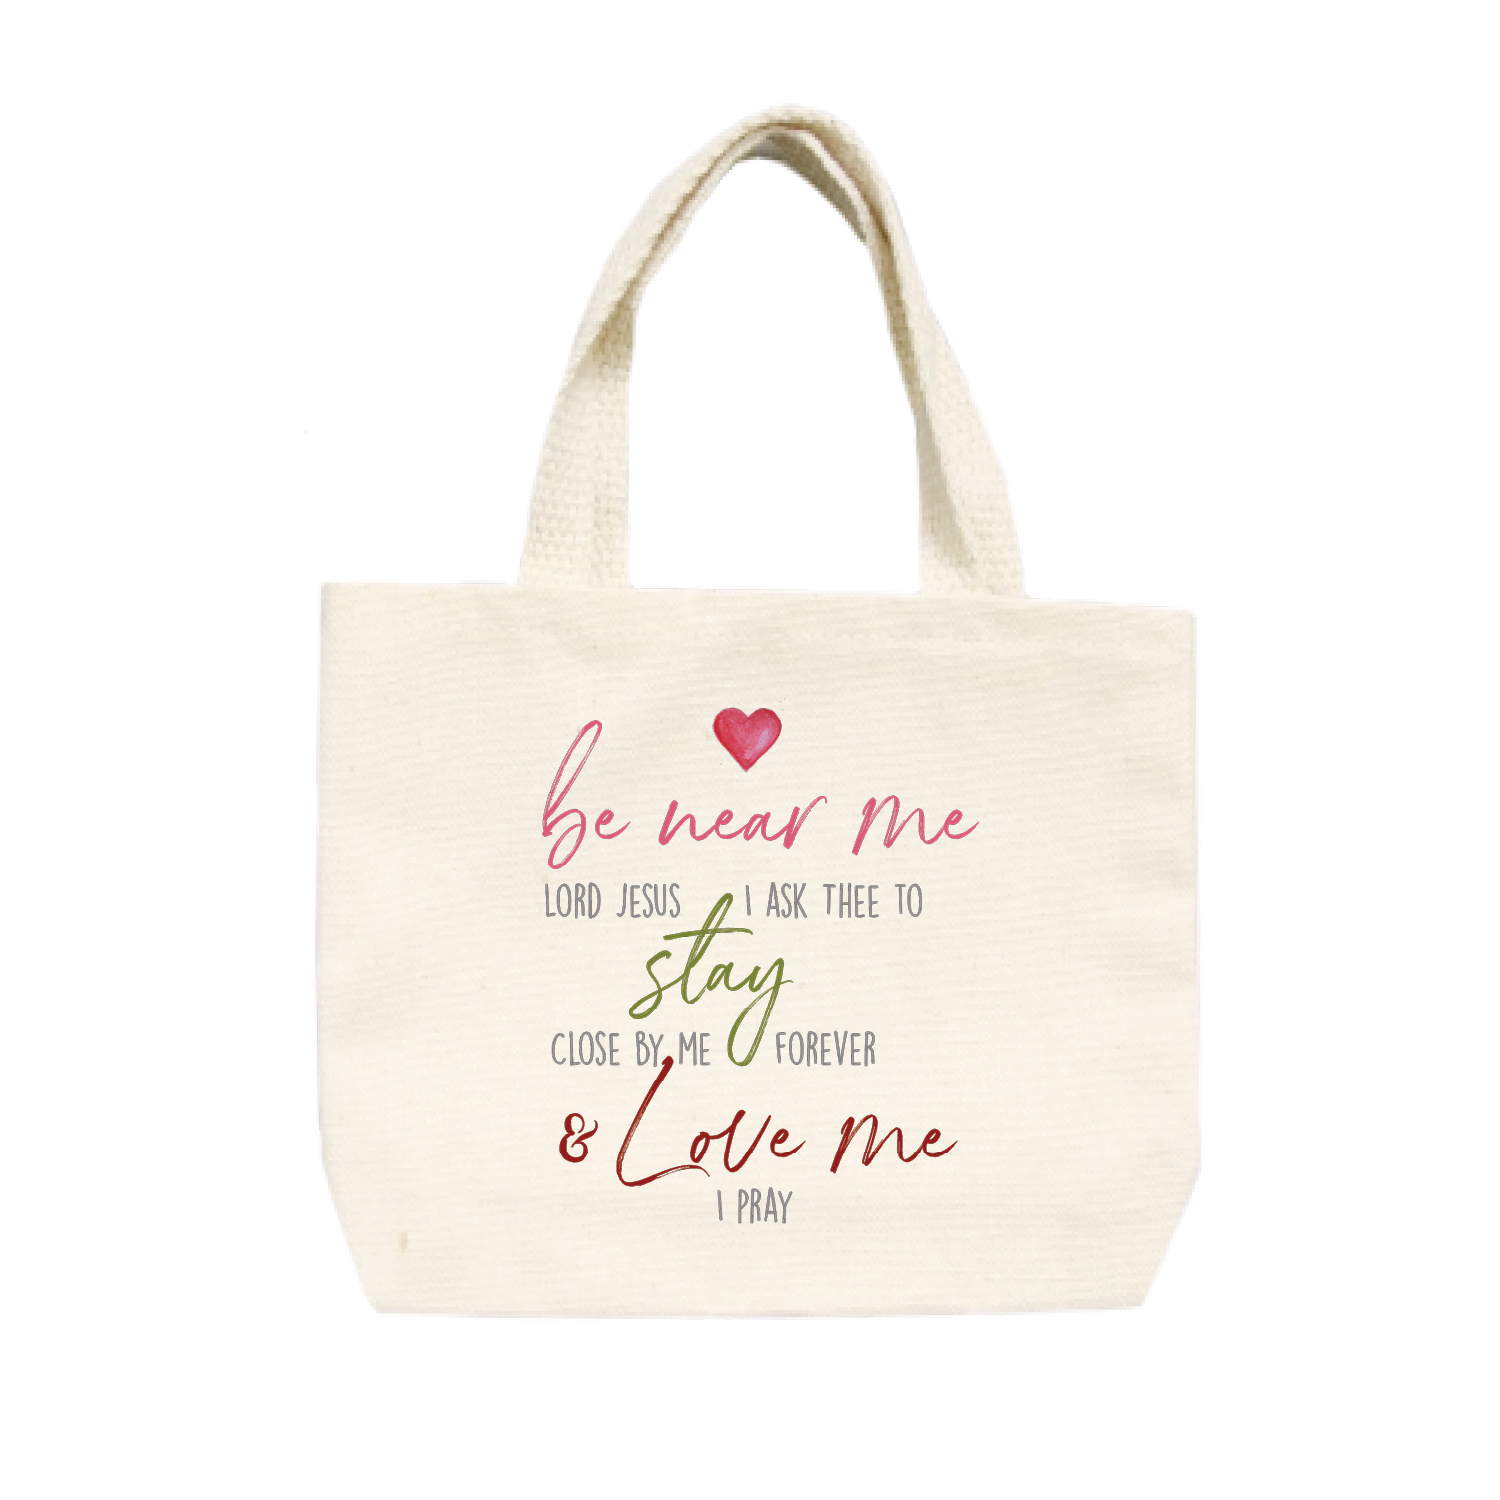 be near me small tote